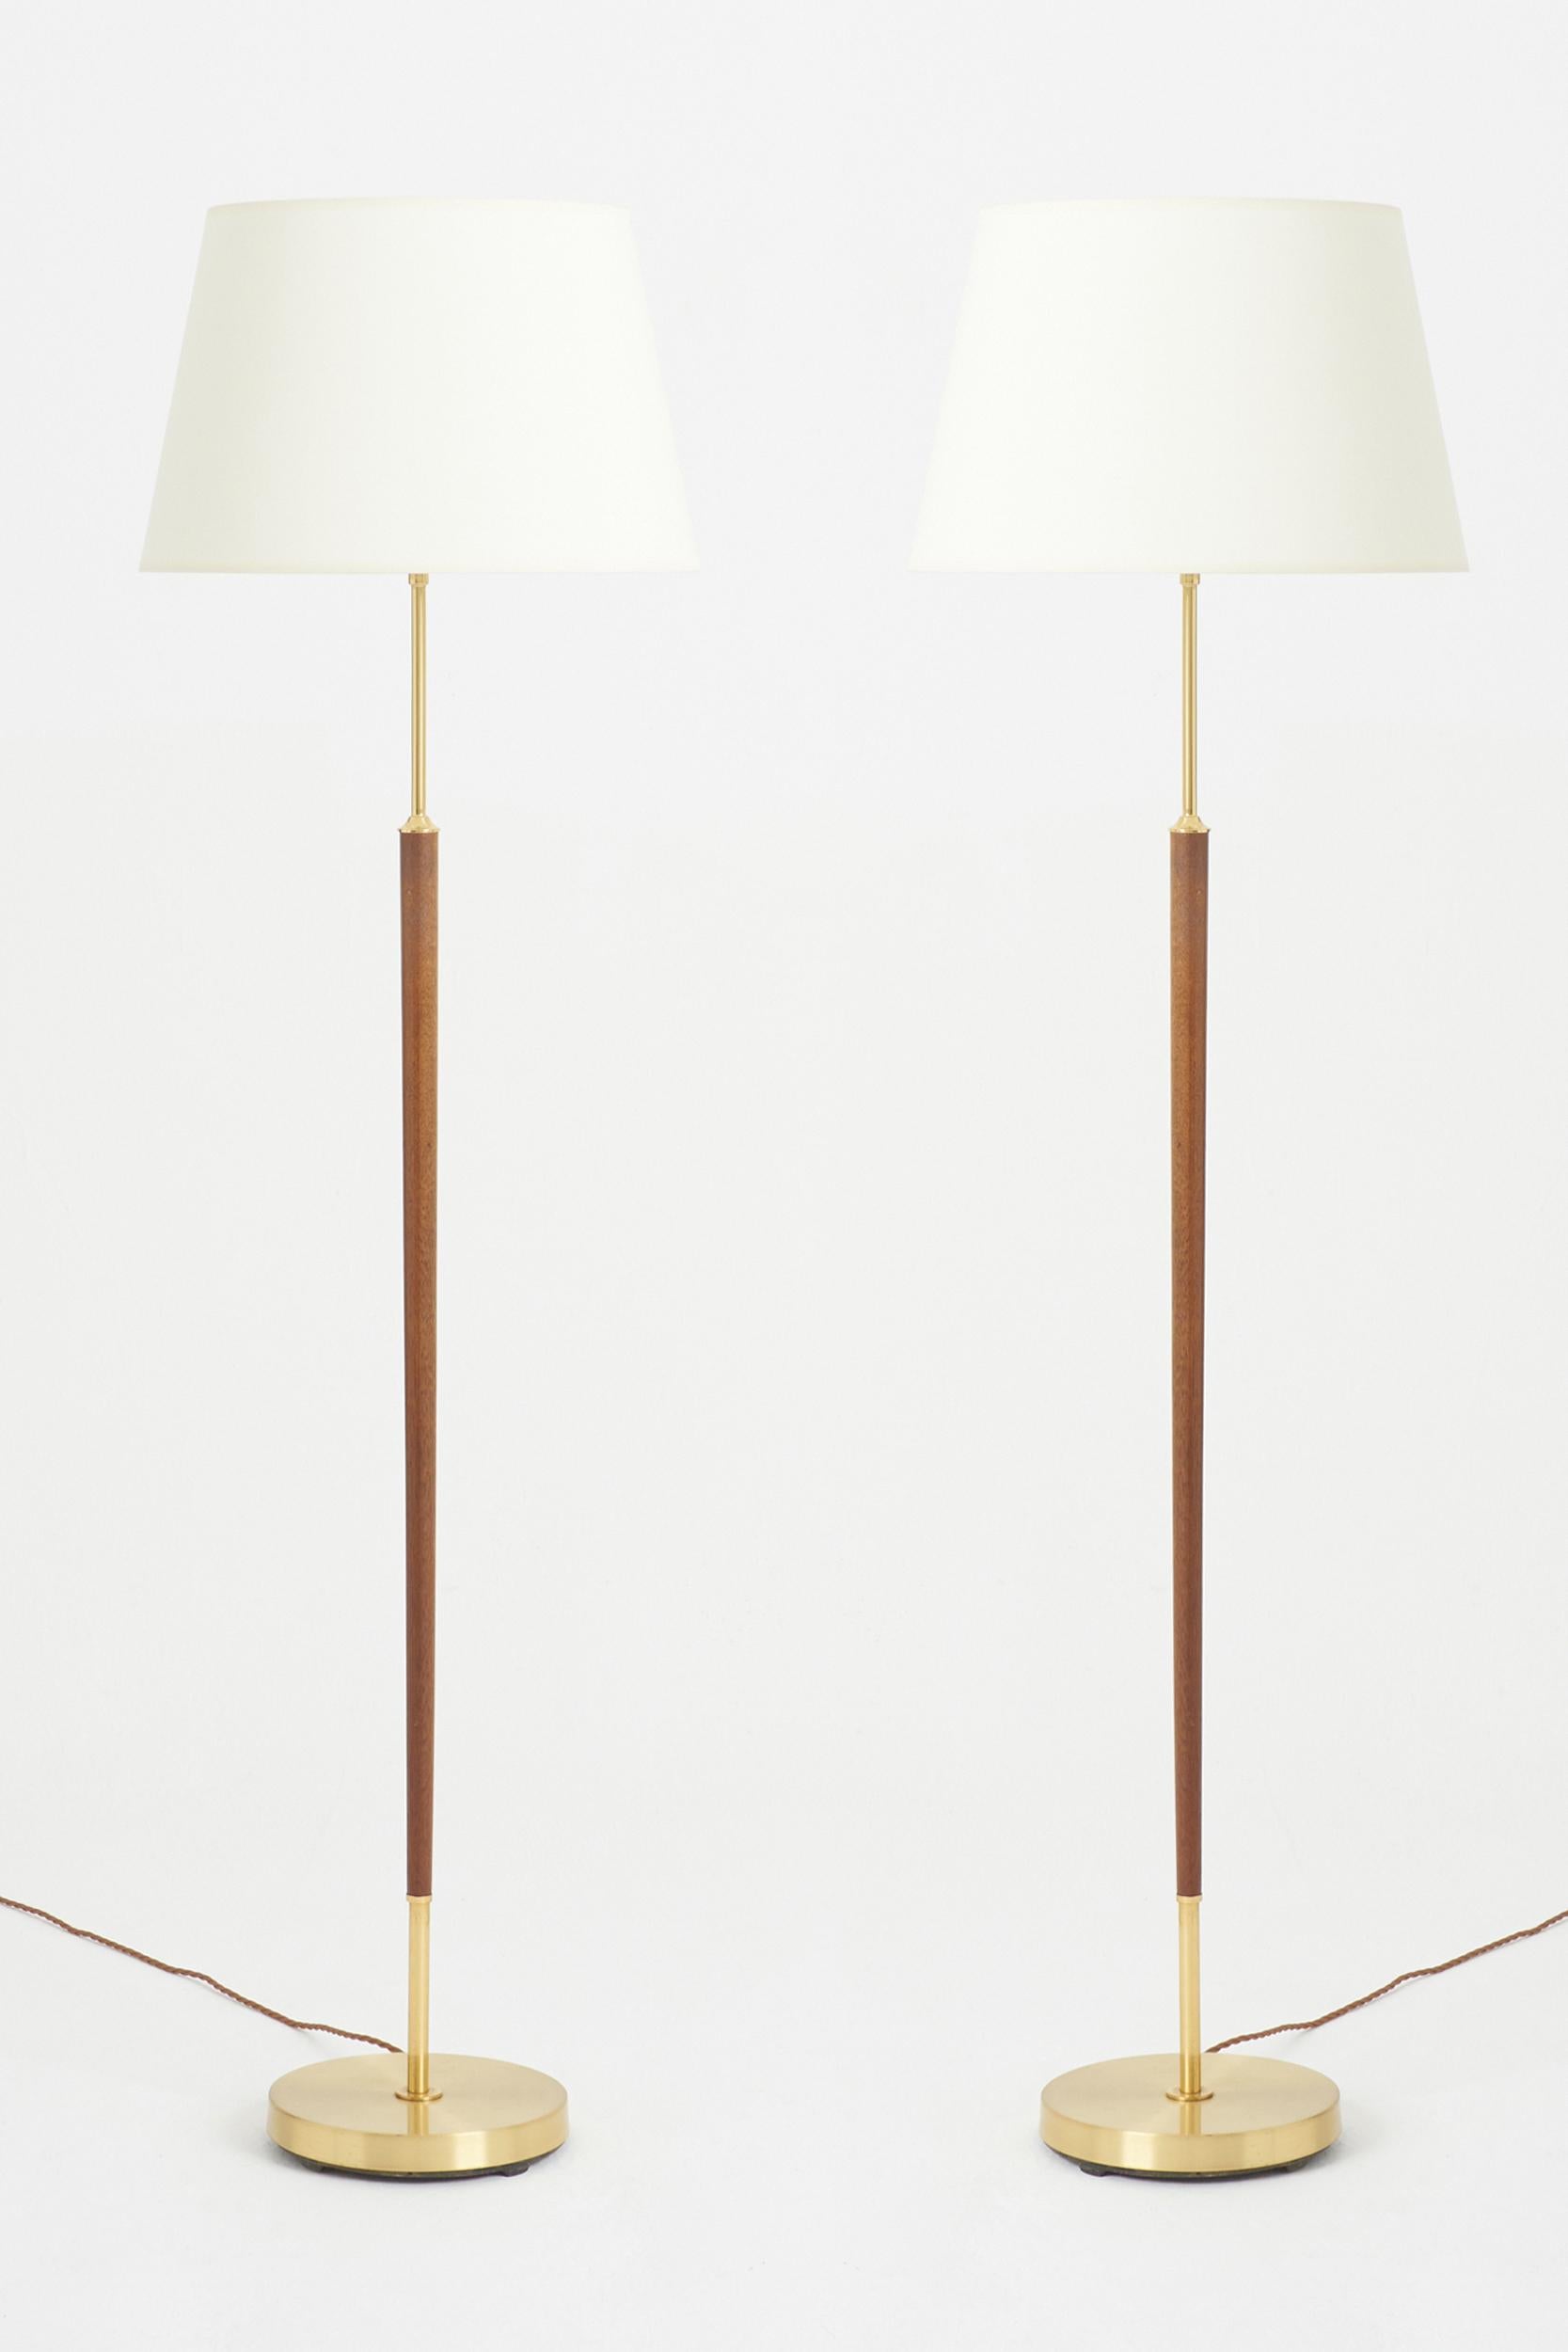 A pair of brass and walnut floor lamps.
Sweden, 1970s.
With the shade: 145 cm high by 41 cm diameter
Lamp base only: 126 cm high by 23 cm diameter